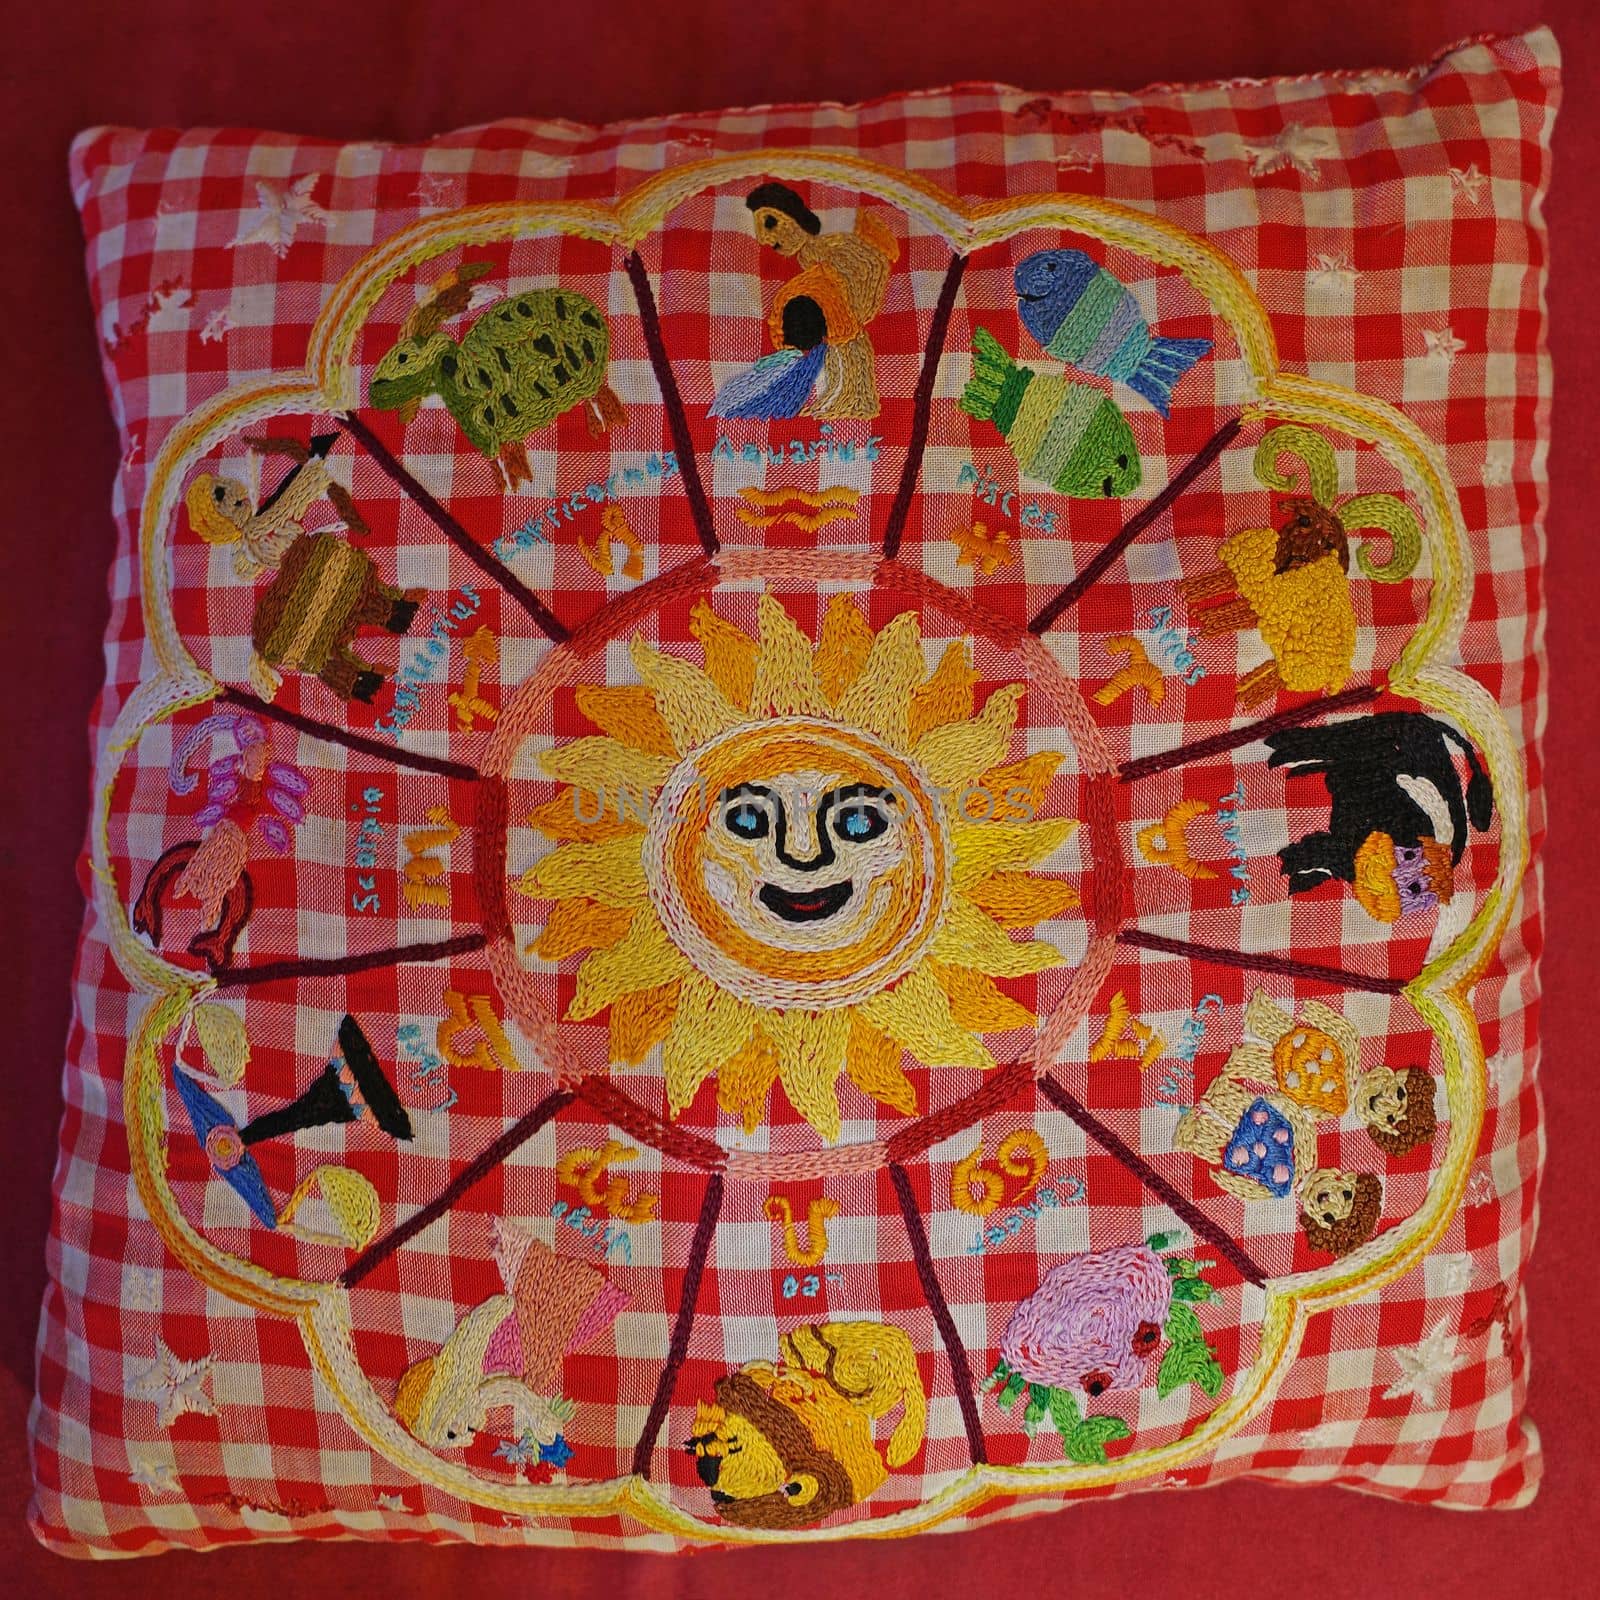 A red and white checkered cushion with embroidered astrological signs. Cute sun in the middle